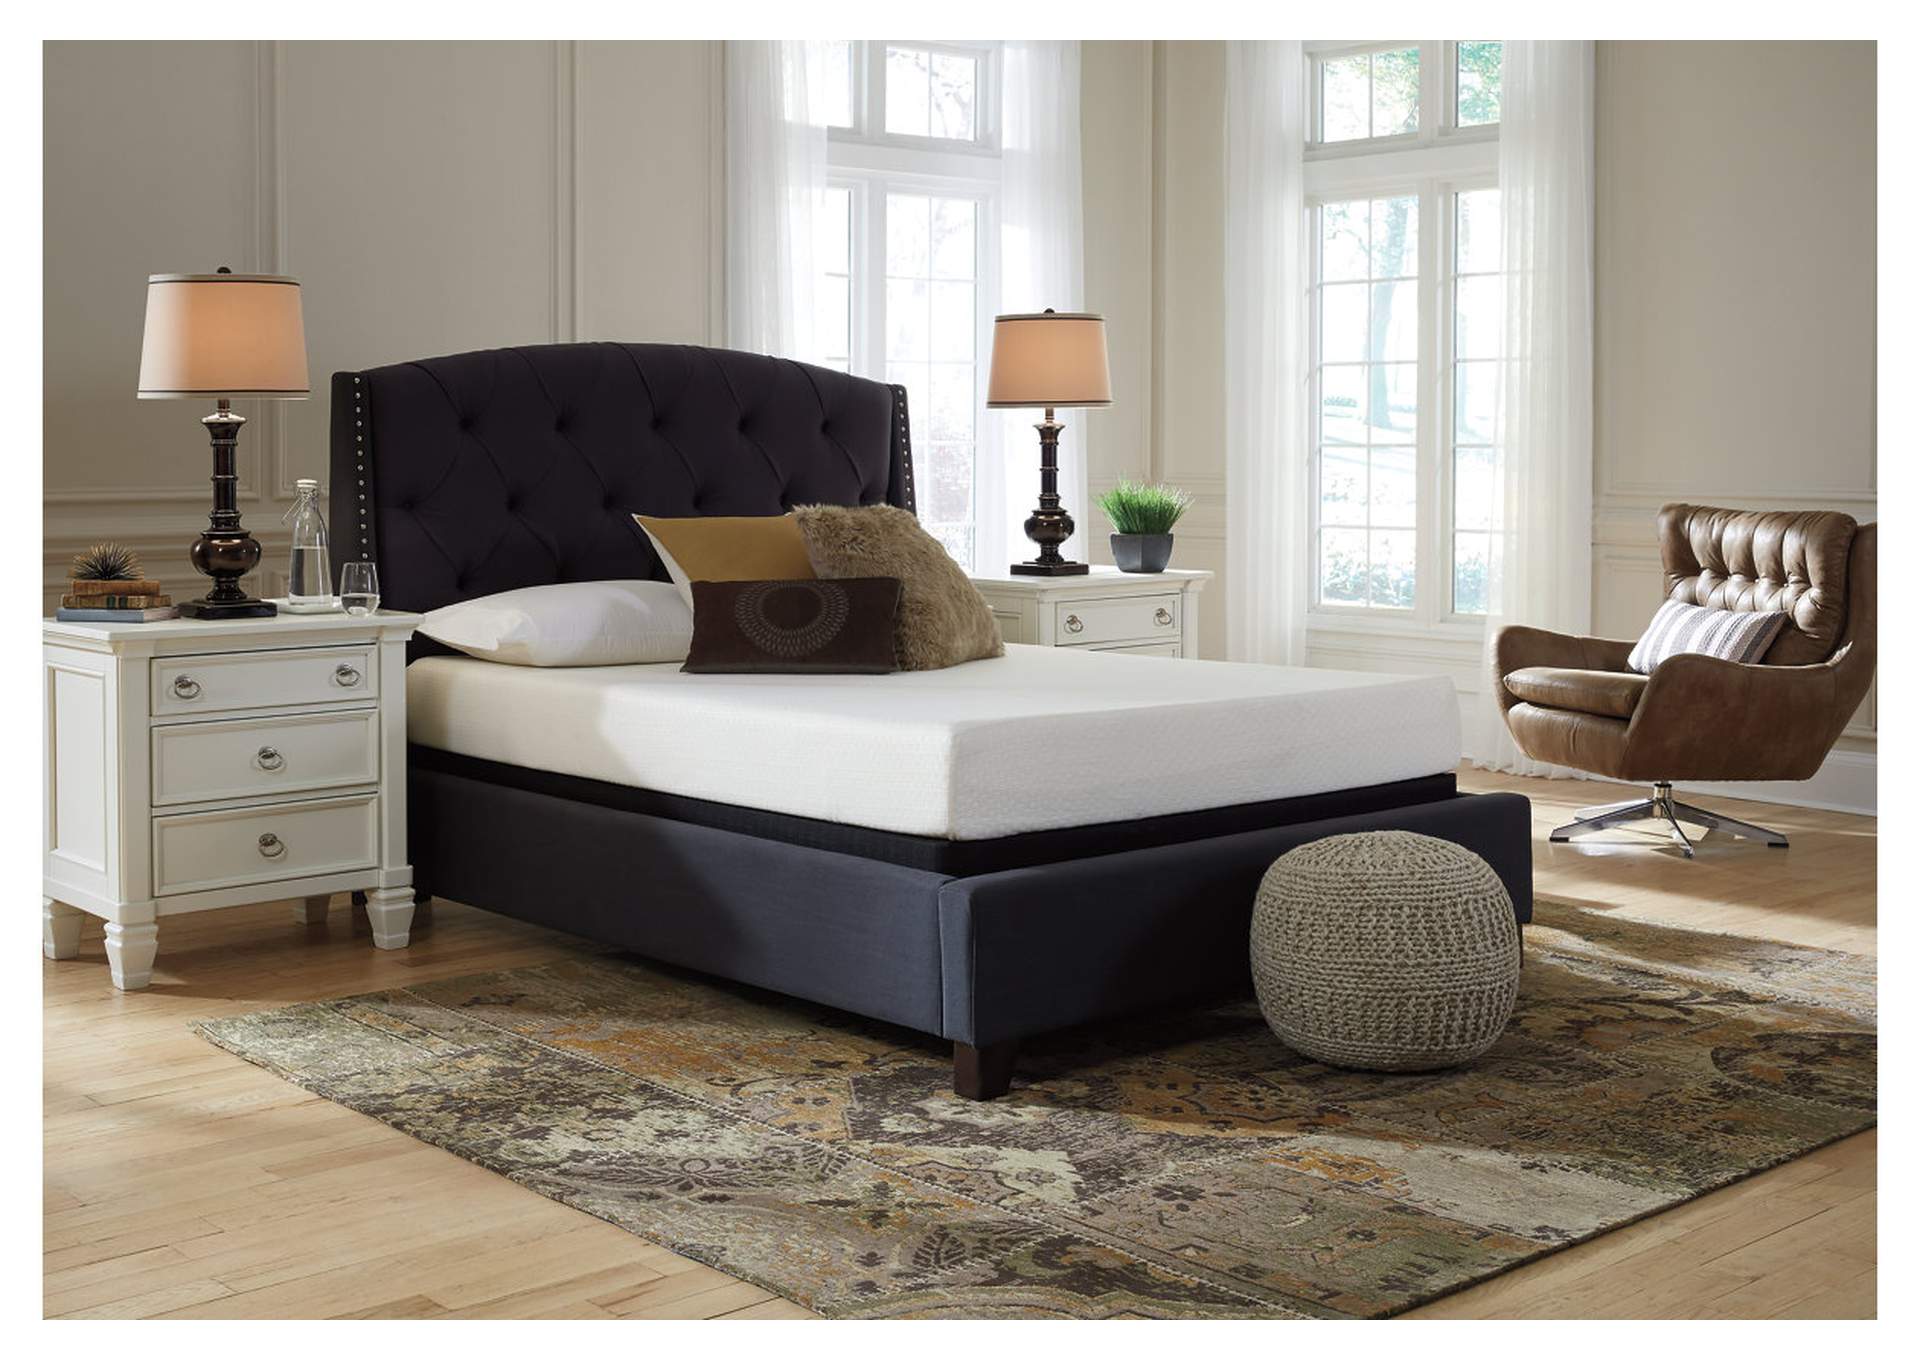 Chime 8 Inch Memory Foam Twin Mattress in a Box,Direct To Consumer Express